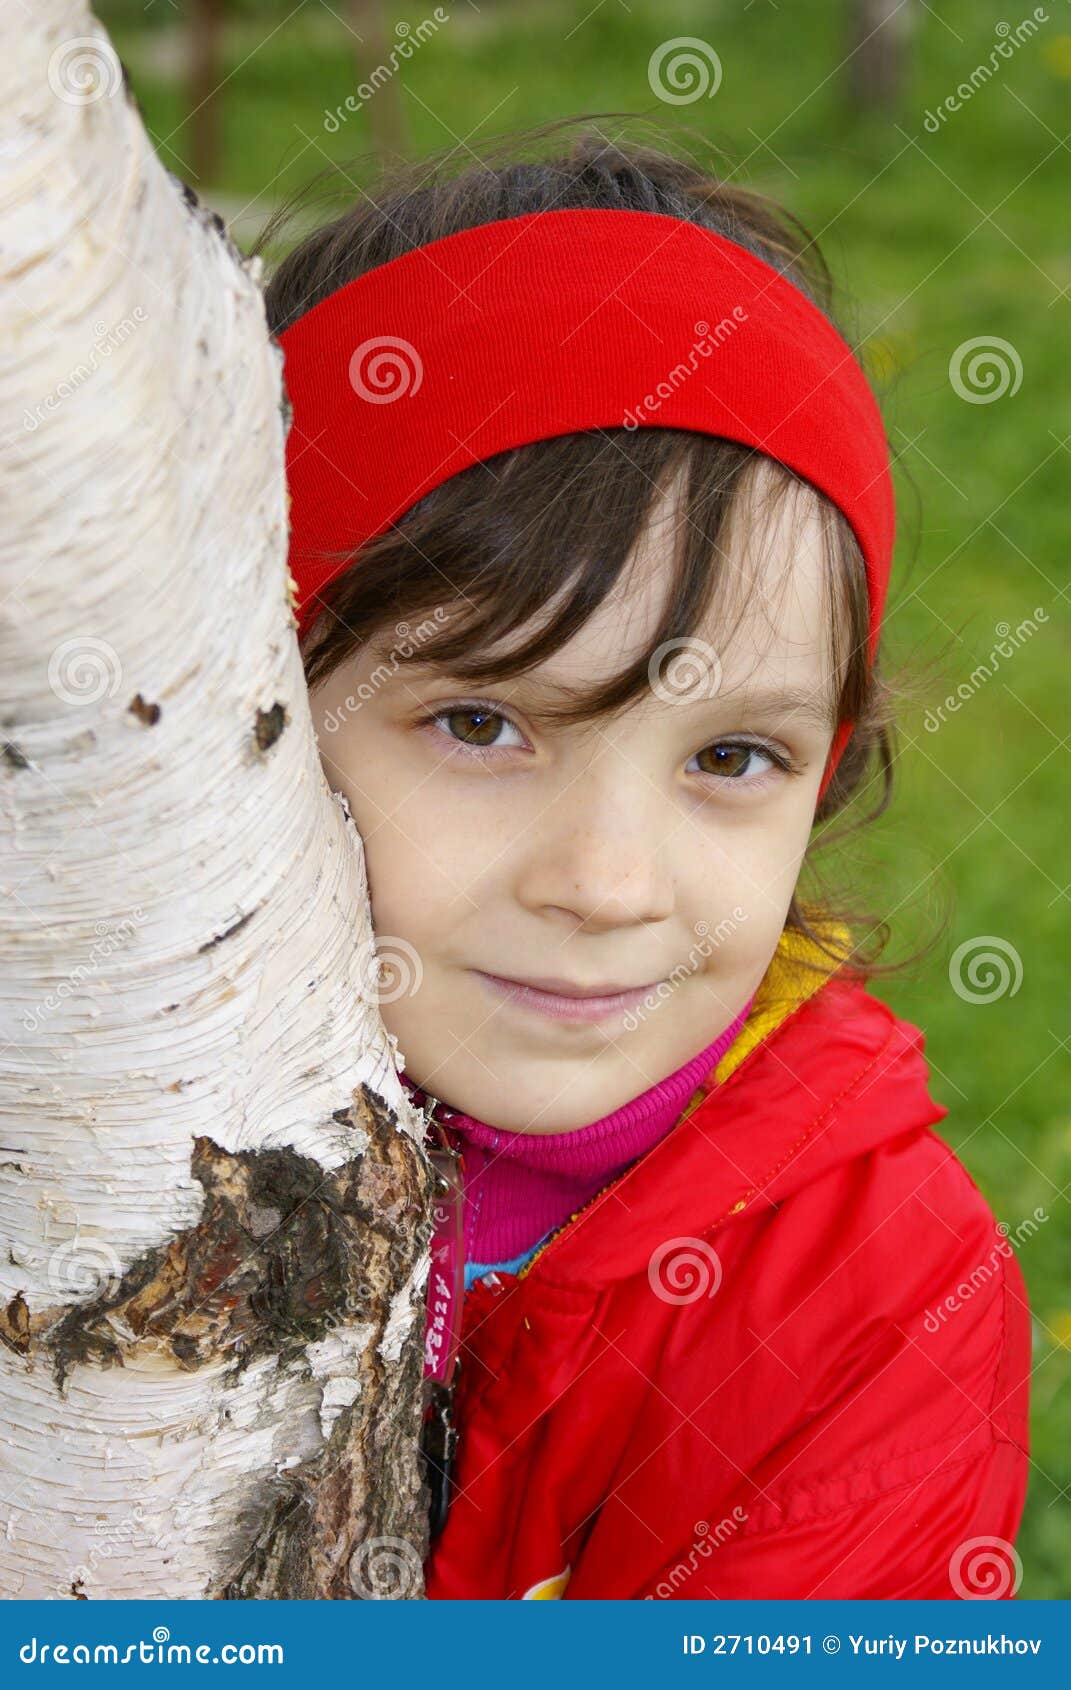 the girl embraces a birch